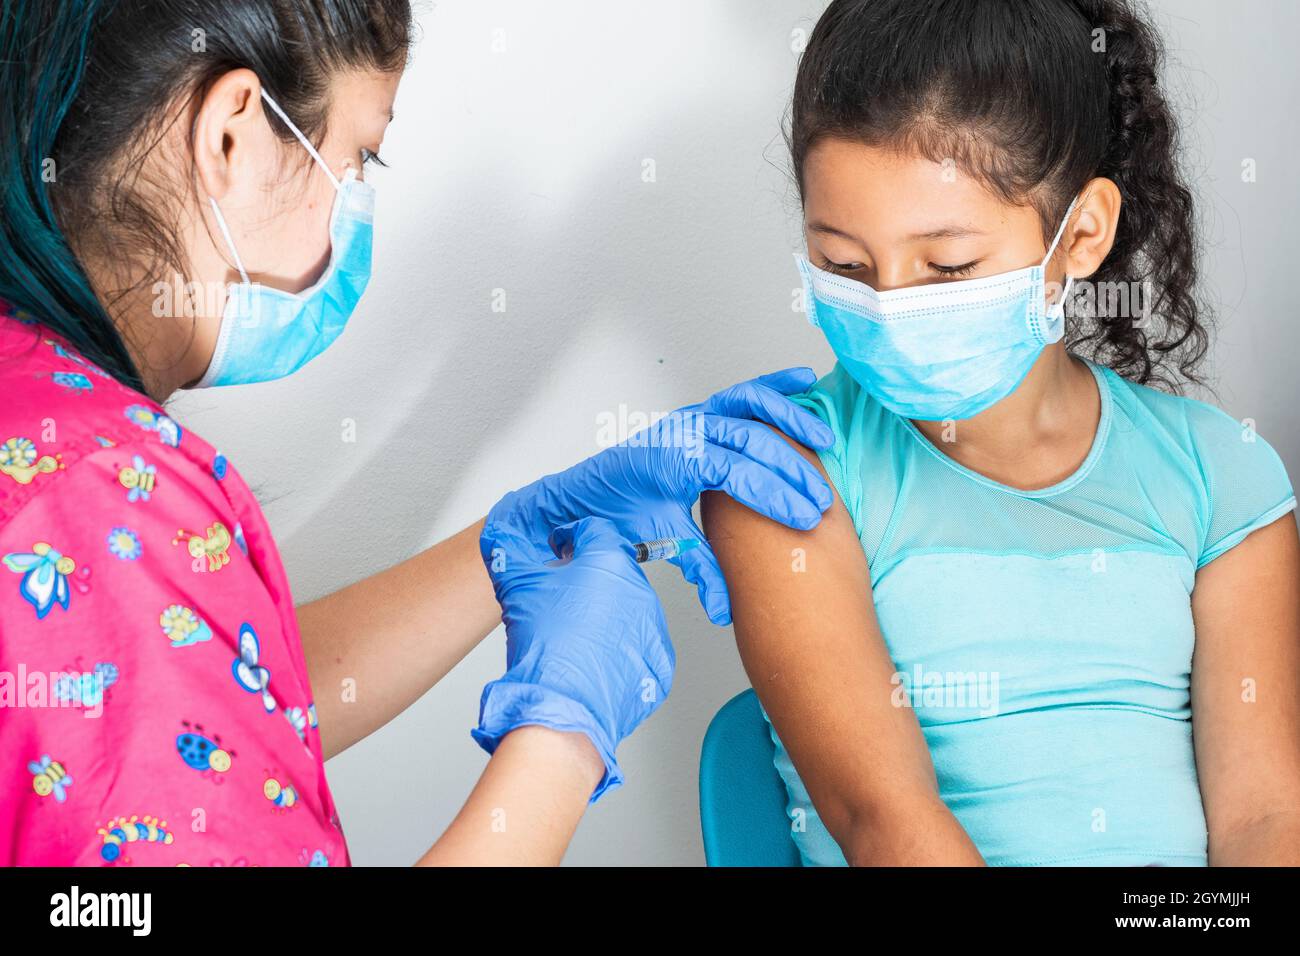 children's nurse injecting brown girl's arm. (8 year old girl), doctor's hands with rubber gloves injecting covid-19 vaccine. flu vaccine. medical con Stock Photo